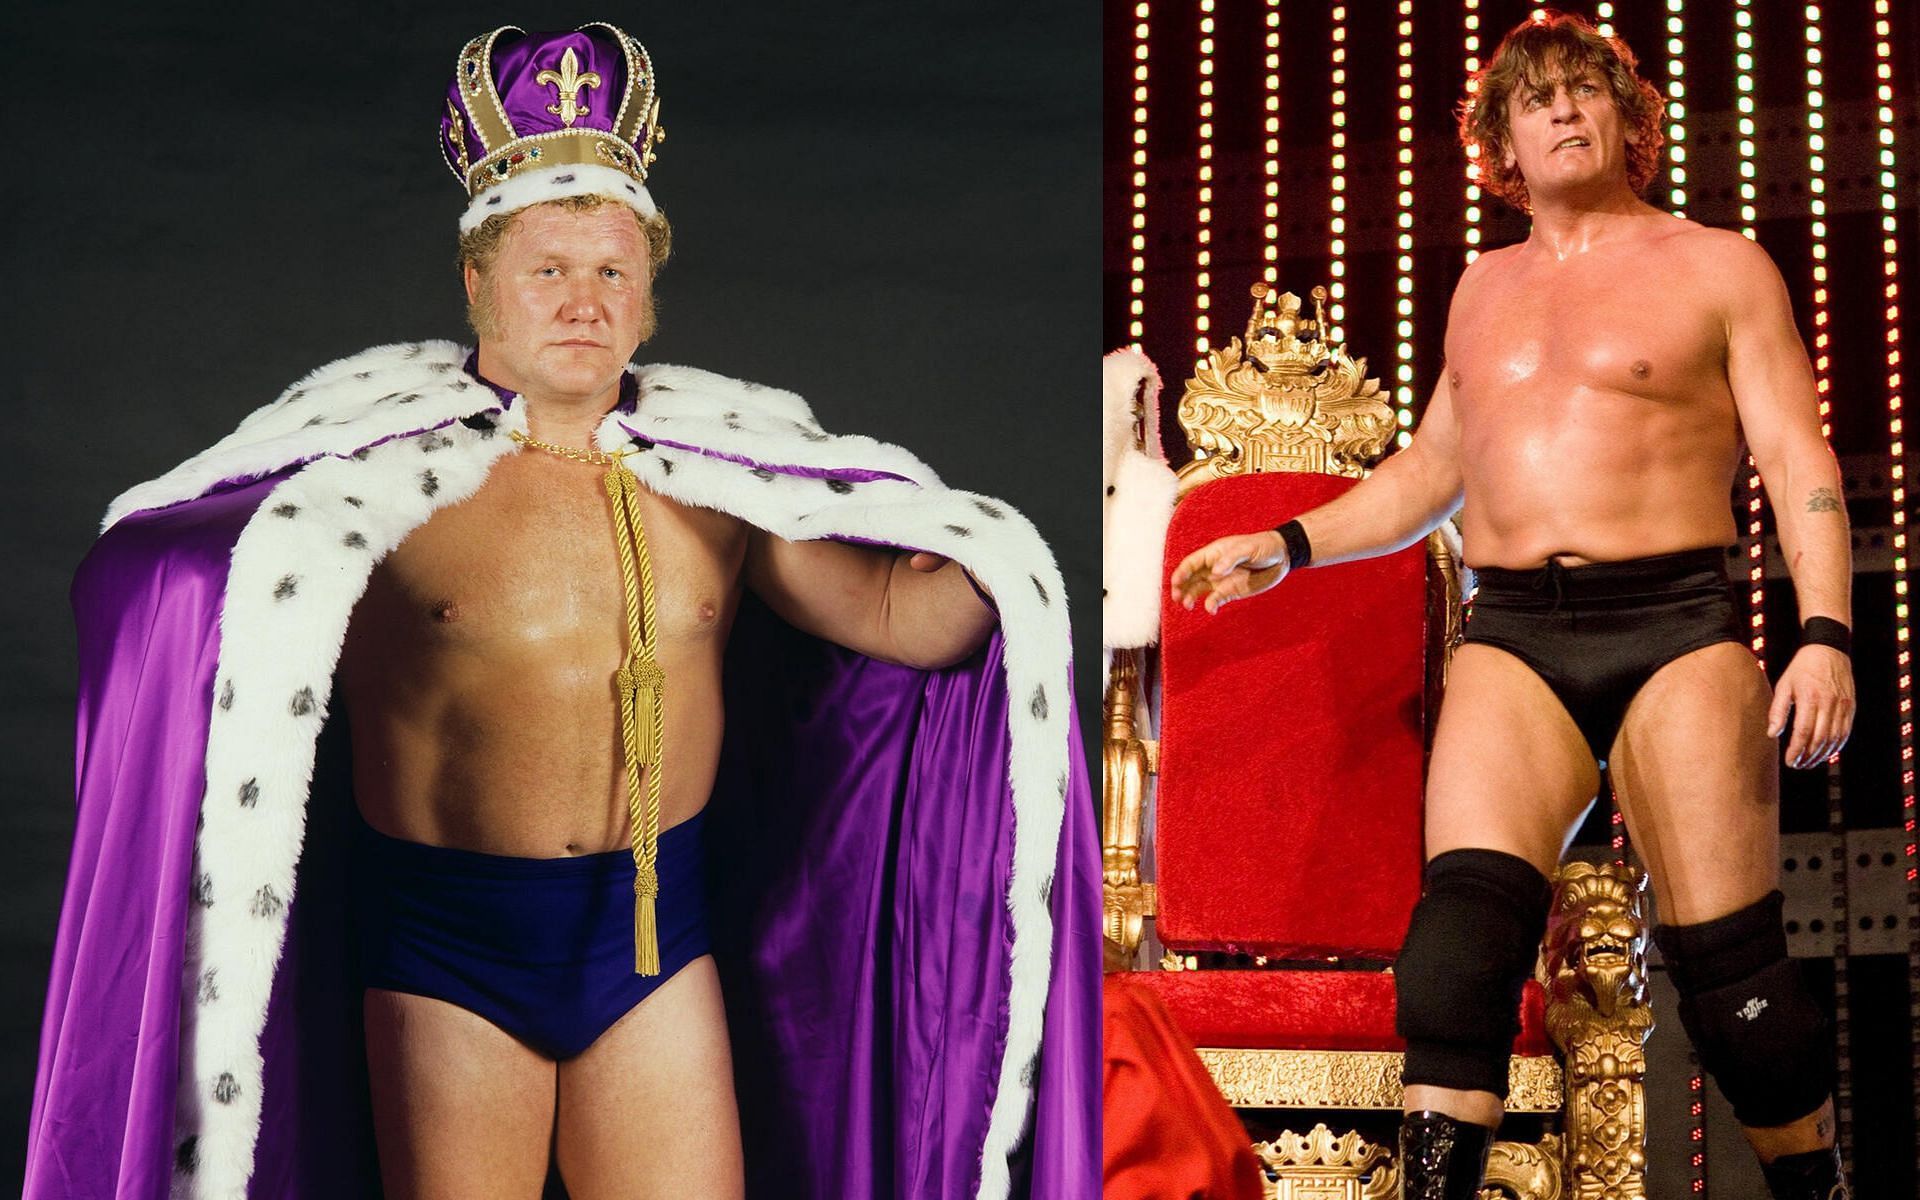 King Harley and King Regal basking in their royal glory!